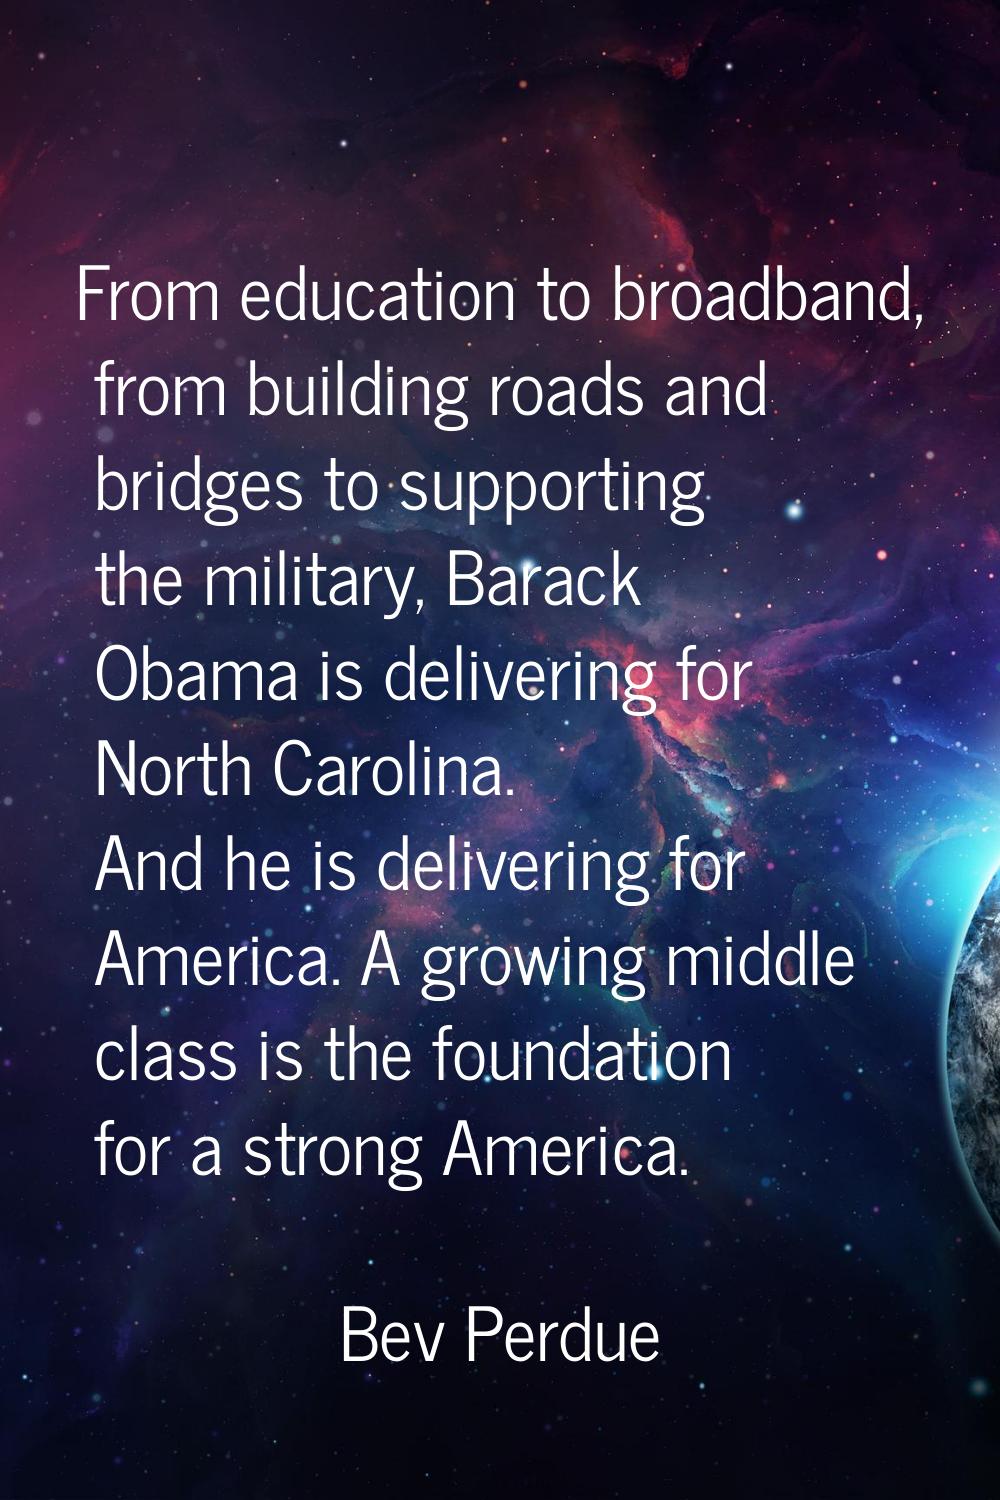 From education to broadband, from building roads and bridges to supporting the military, Barack Oba